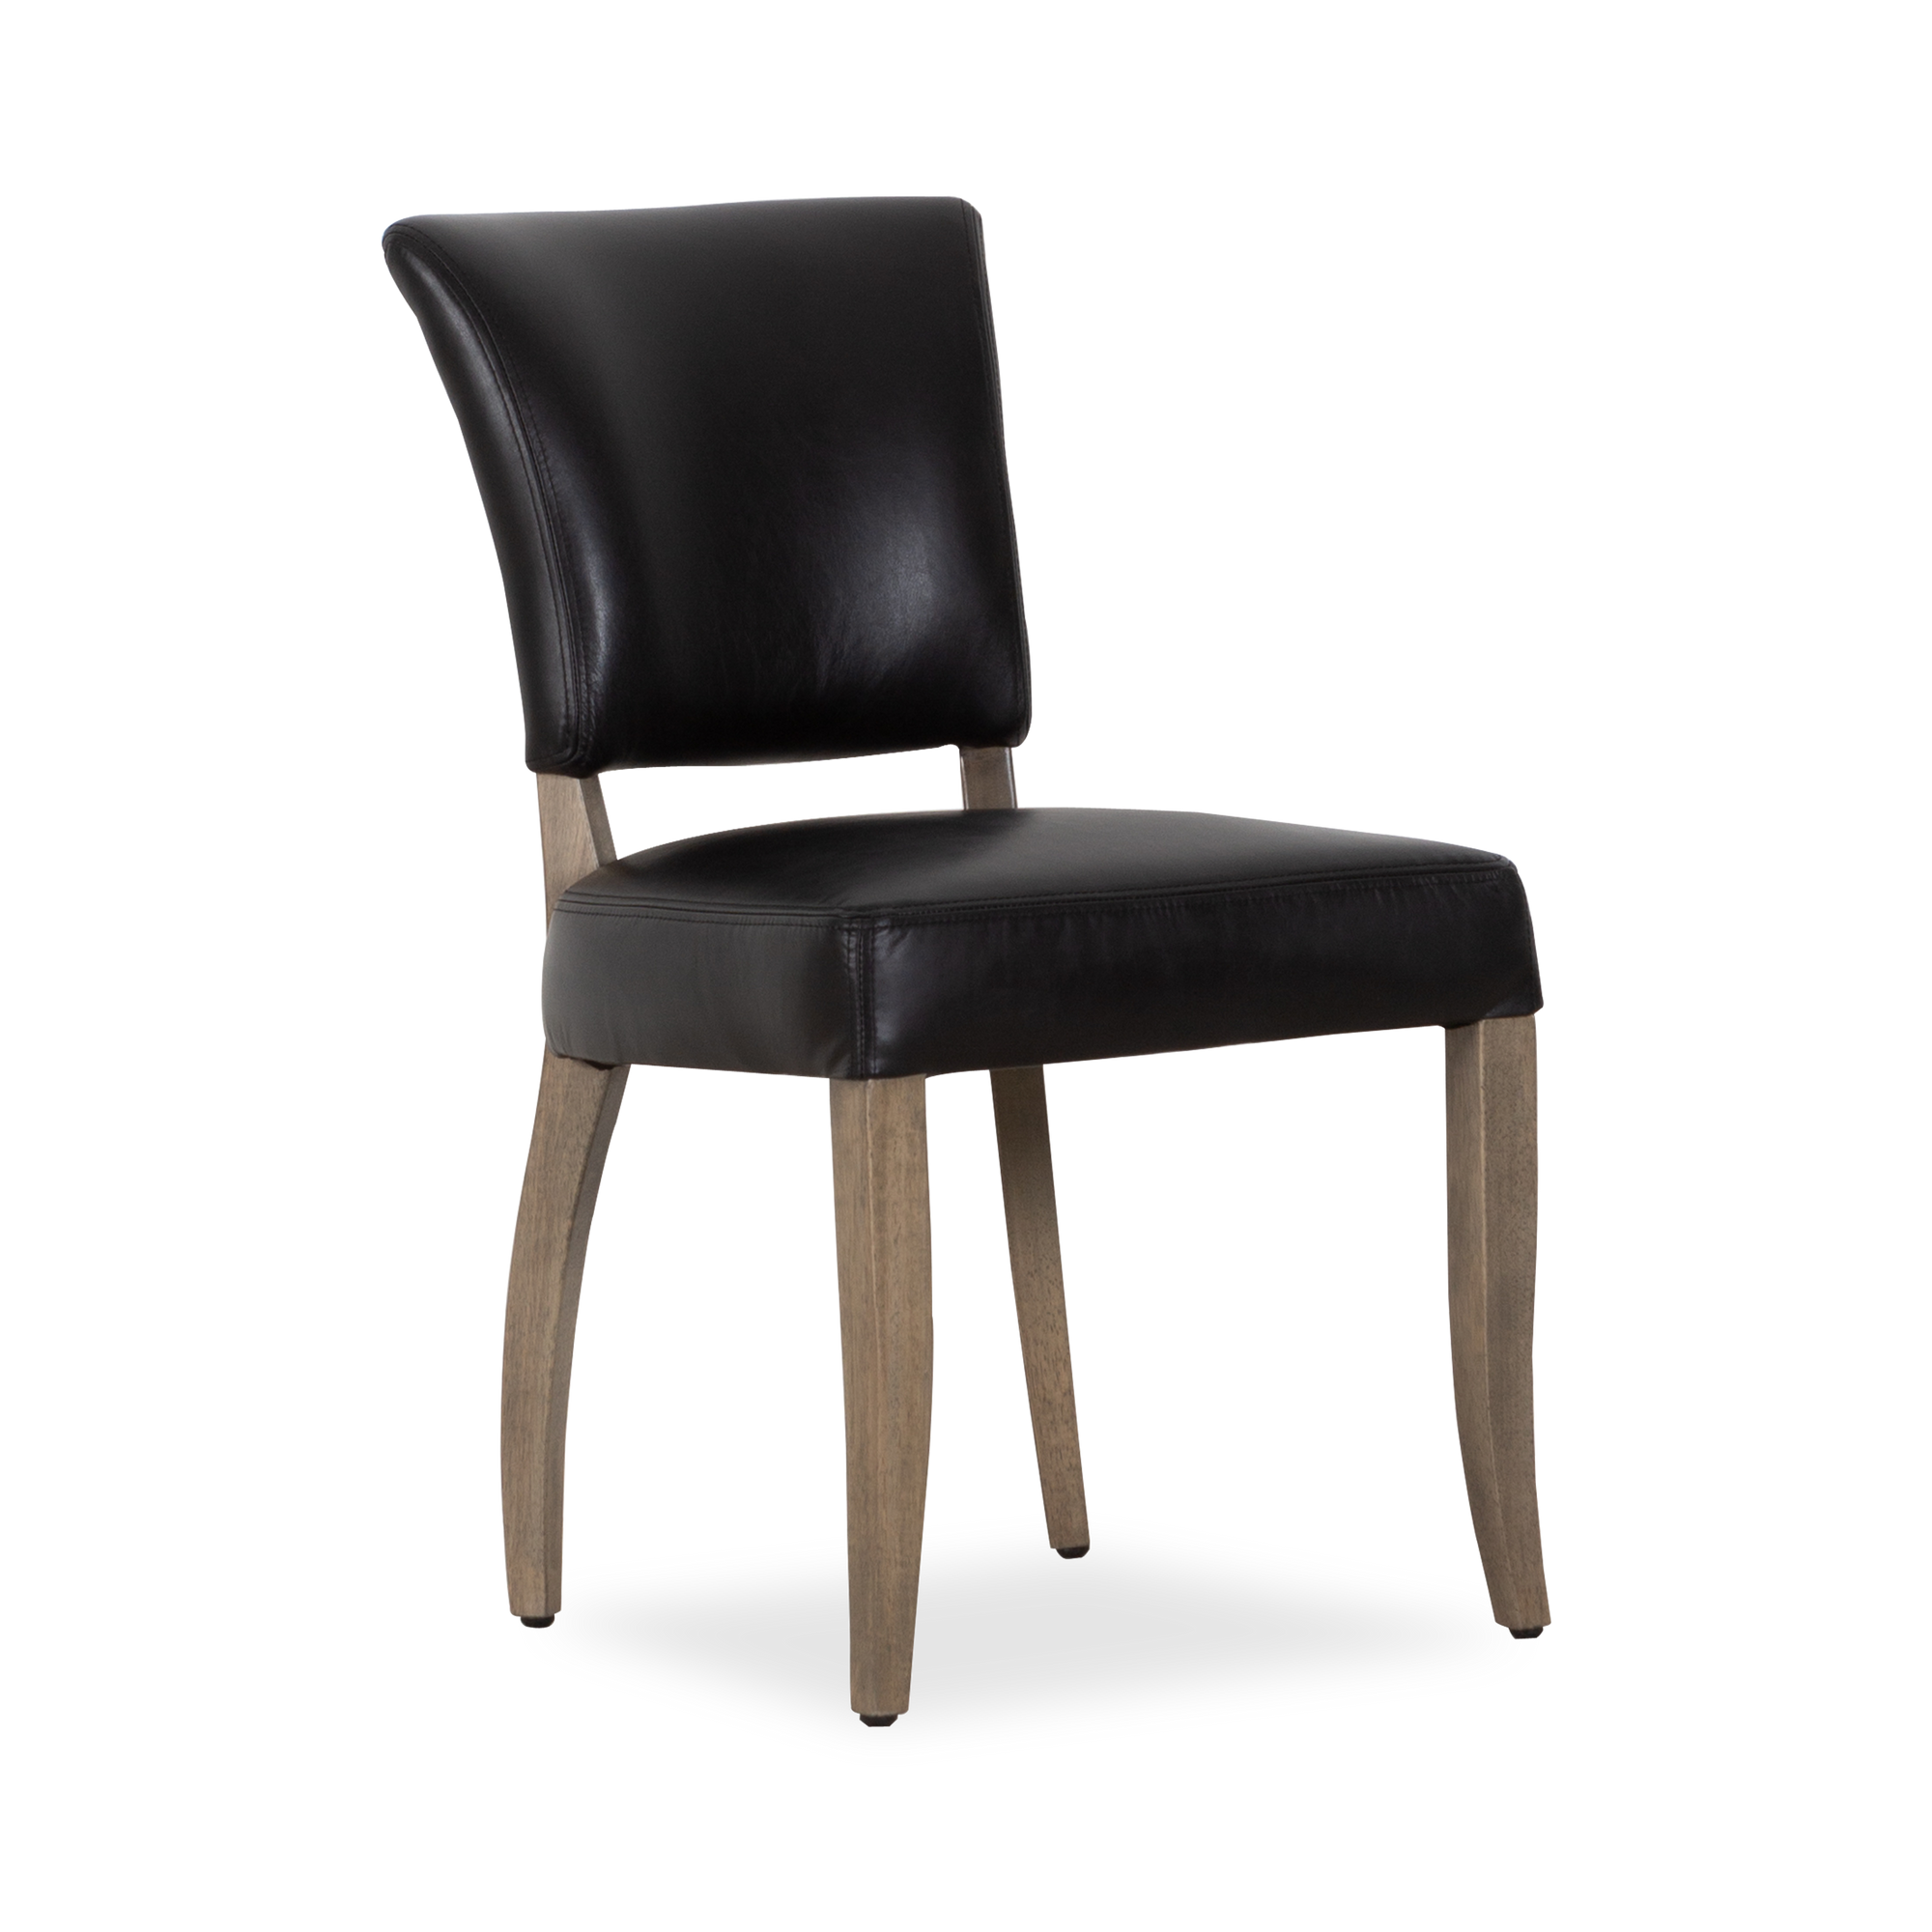 The Mimi Dining Side Chair is a reinvention of a classic 1940s French dining chair with stud detailing and tapered wooden legs.